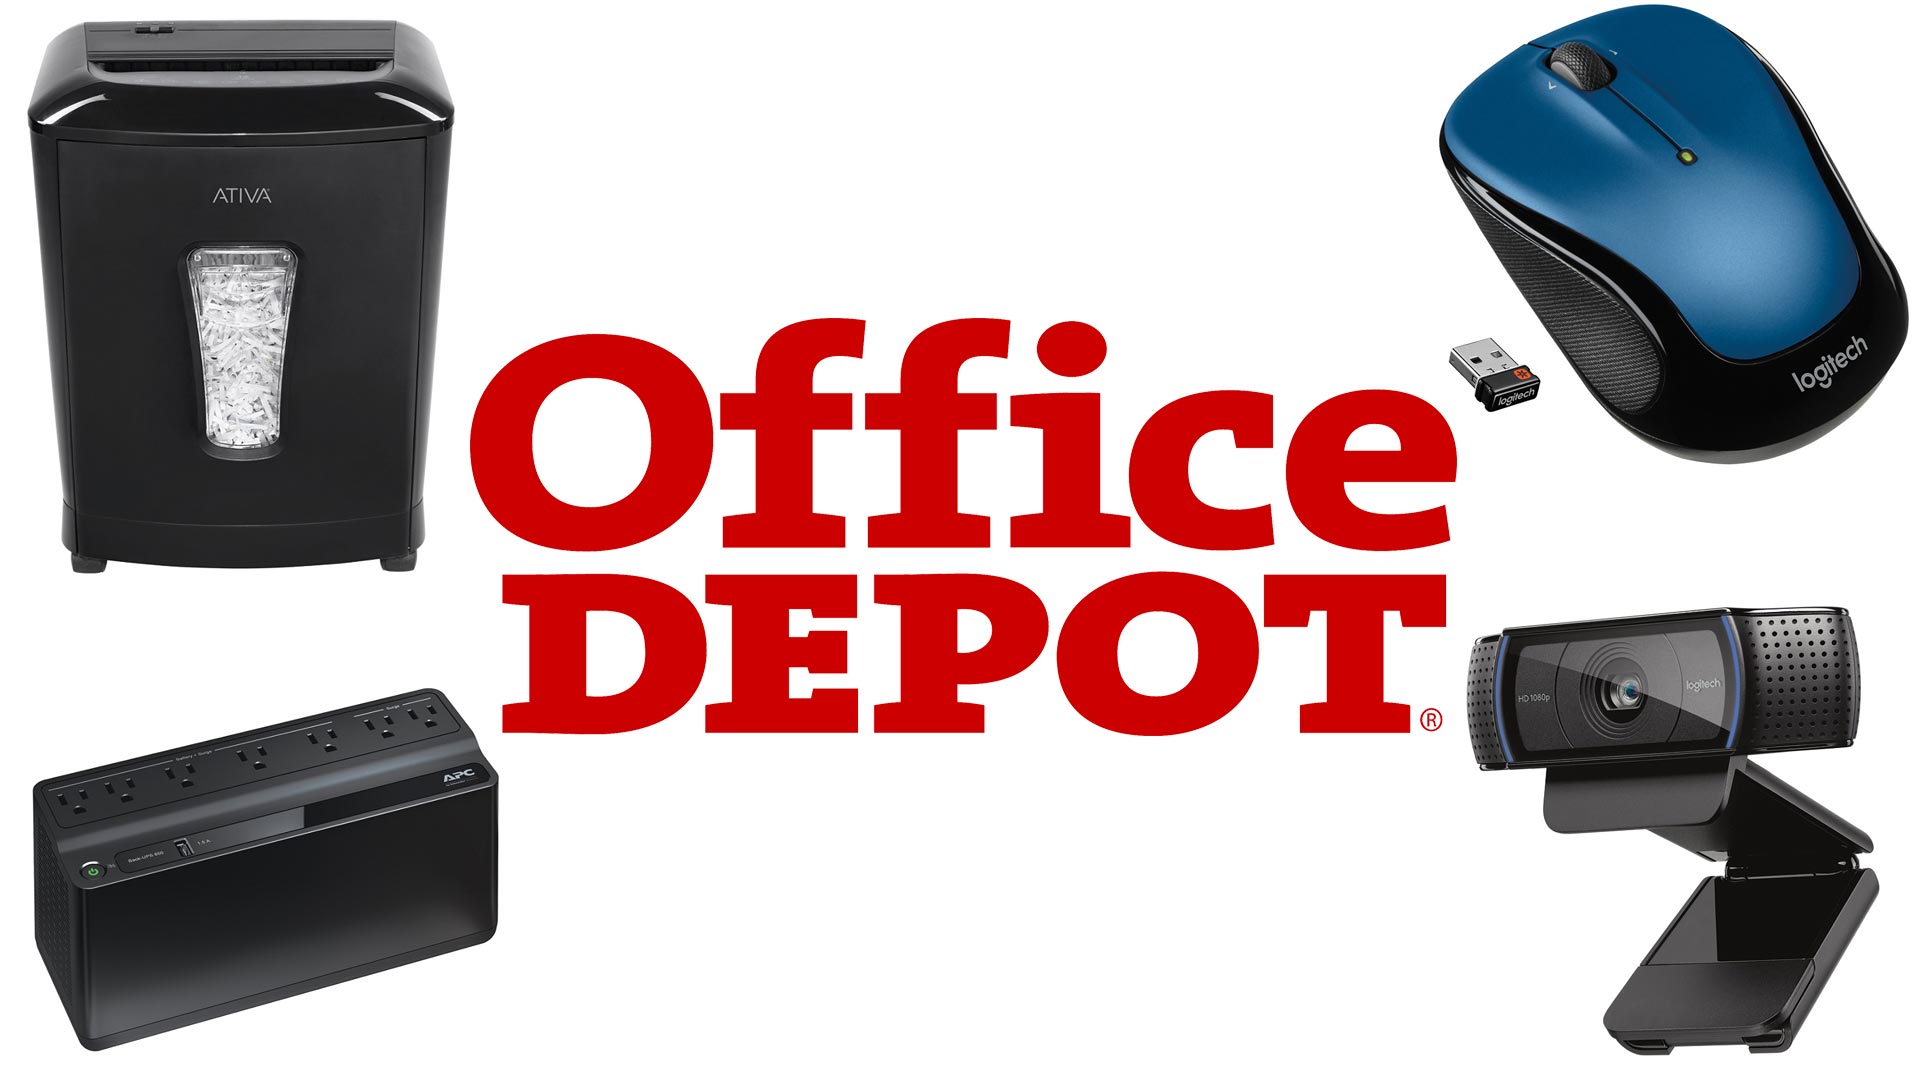 Score up to 50% off in Office Depot&#39;s 24-hour flash sale: APC 650VA Back-UPS $40, more - 9to5Toys